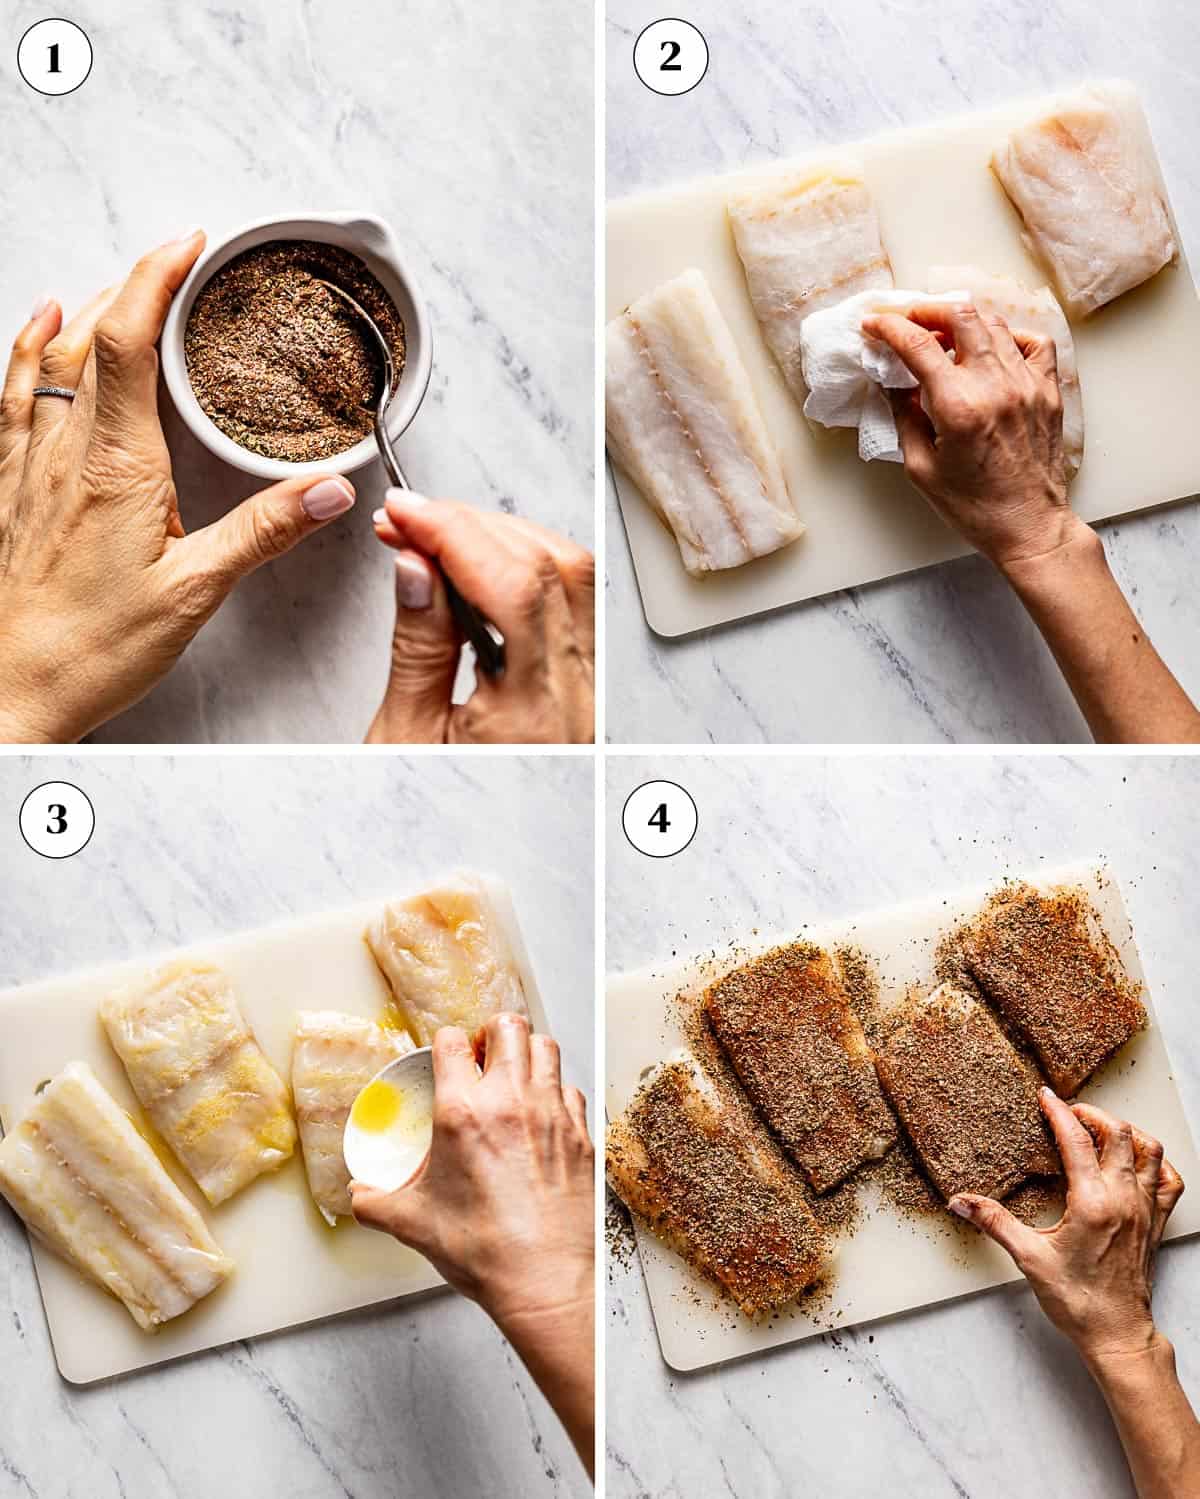 A collage of images showing how to prepare blackened cod for cooking.